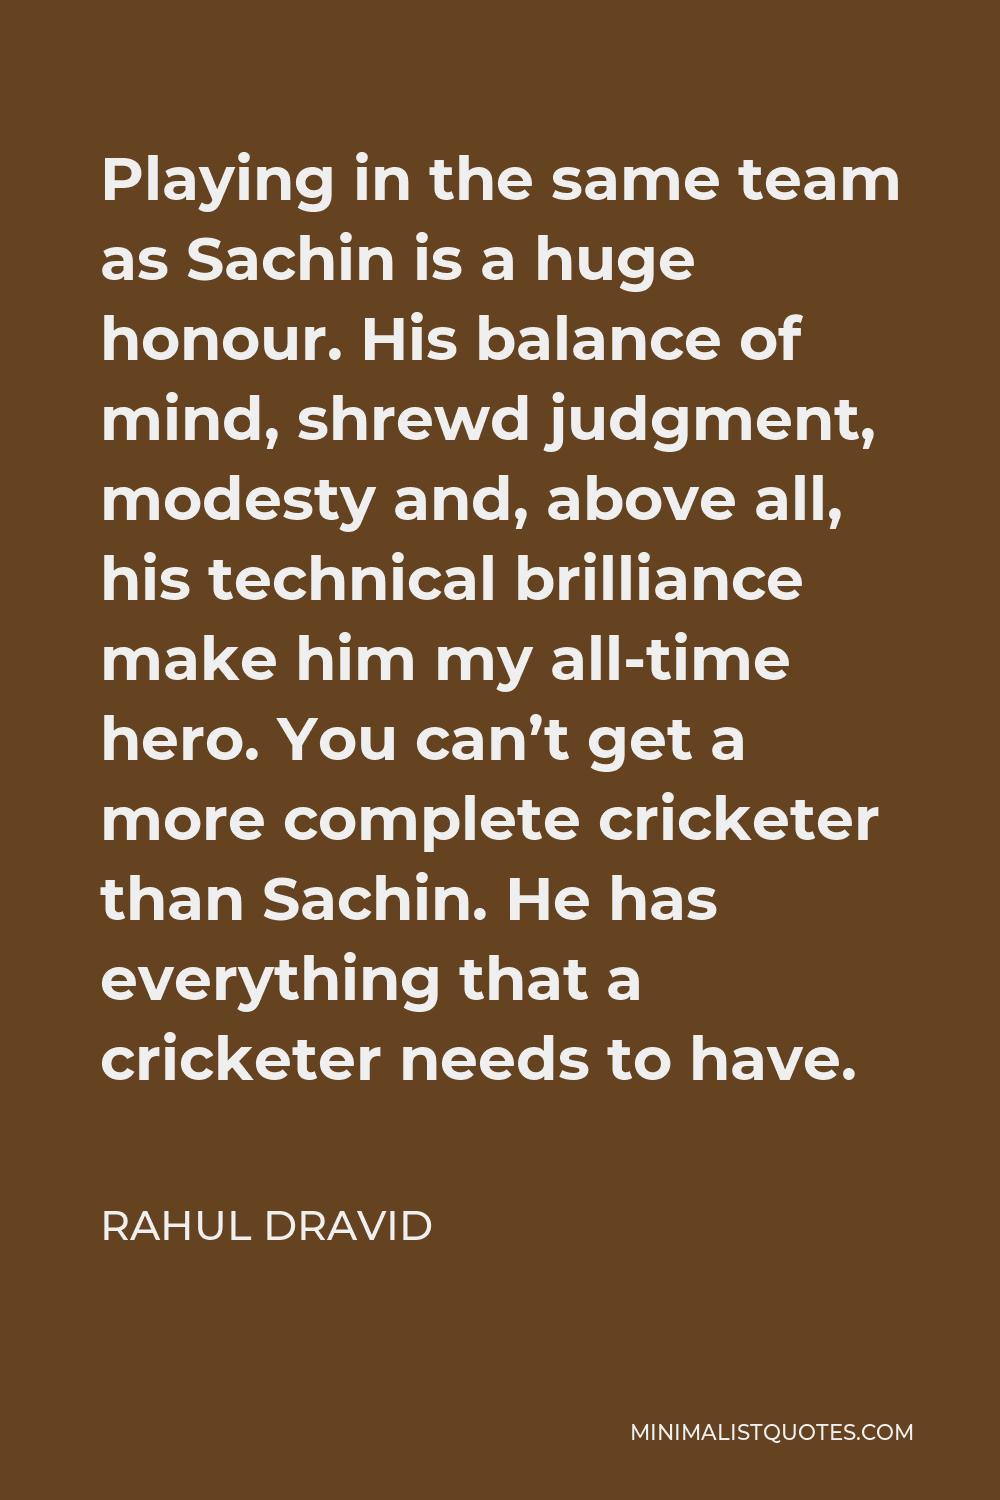 Rahul Dravid Quote - Playing in the same team as Sachin is a huge honour. His balance of mind, shrewd judgment, modesty and, above all, his technical brilliance make him my all-time hero. You can’t get a more complete cricketer than Sachin. He has everything that a cricketer needs to have.